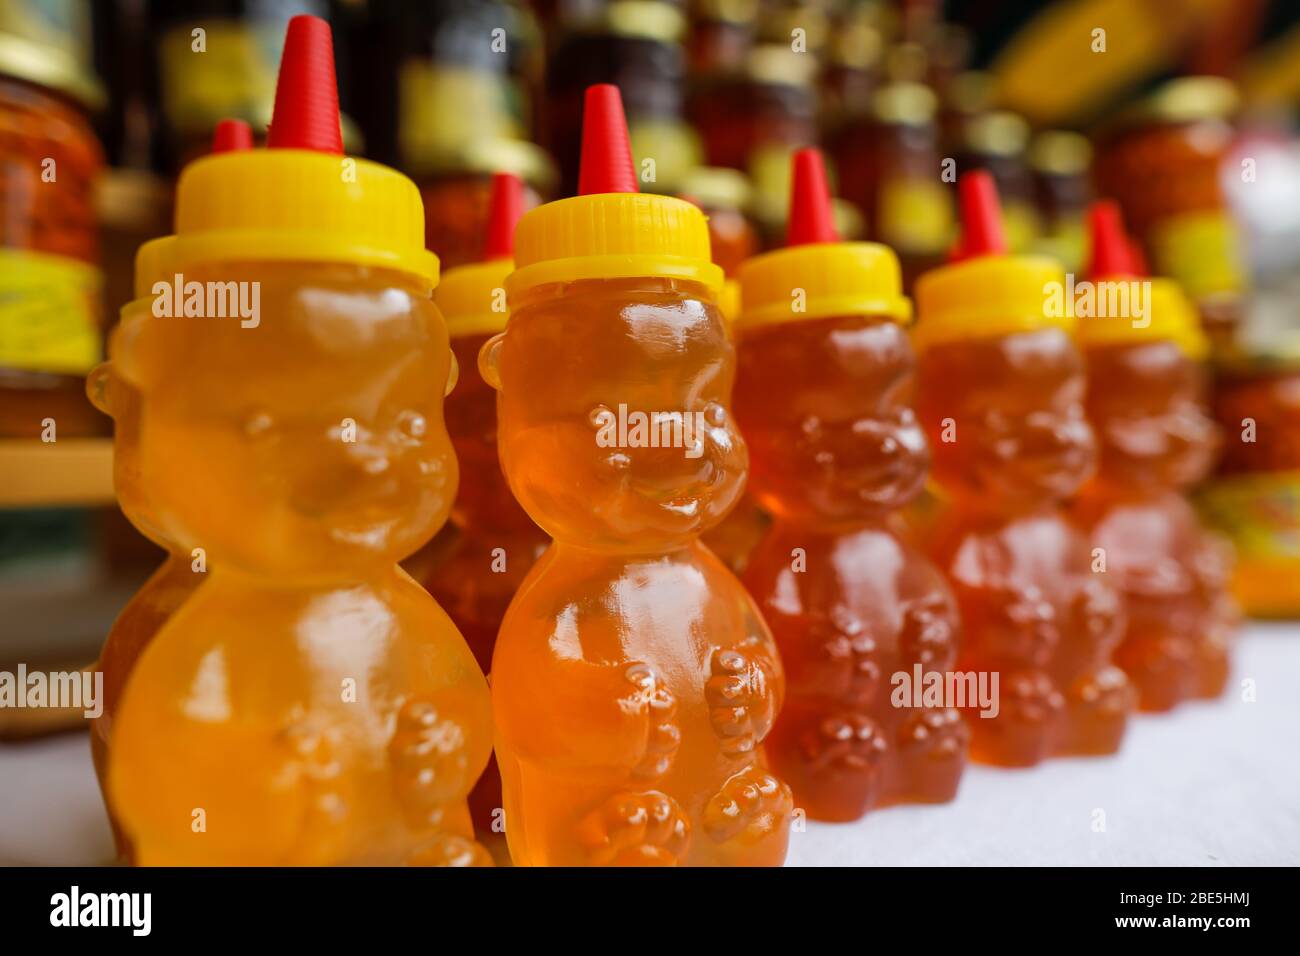 Bee honey in plastic bear shaped bottles on display in a market. Stock Photo